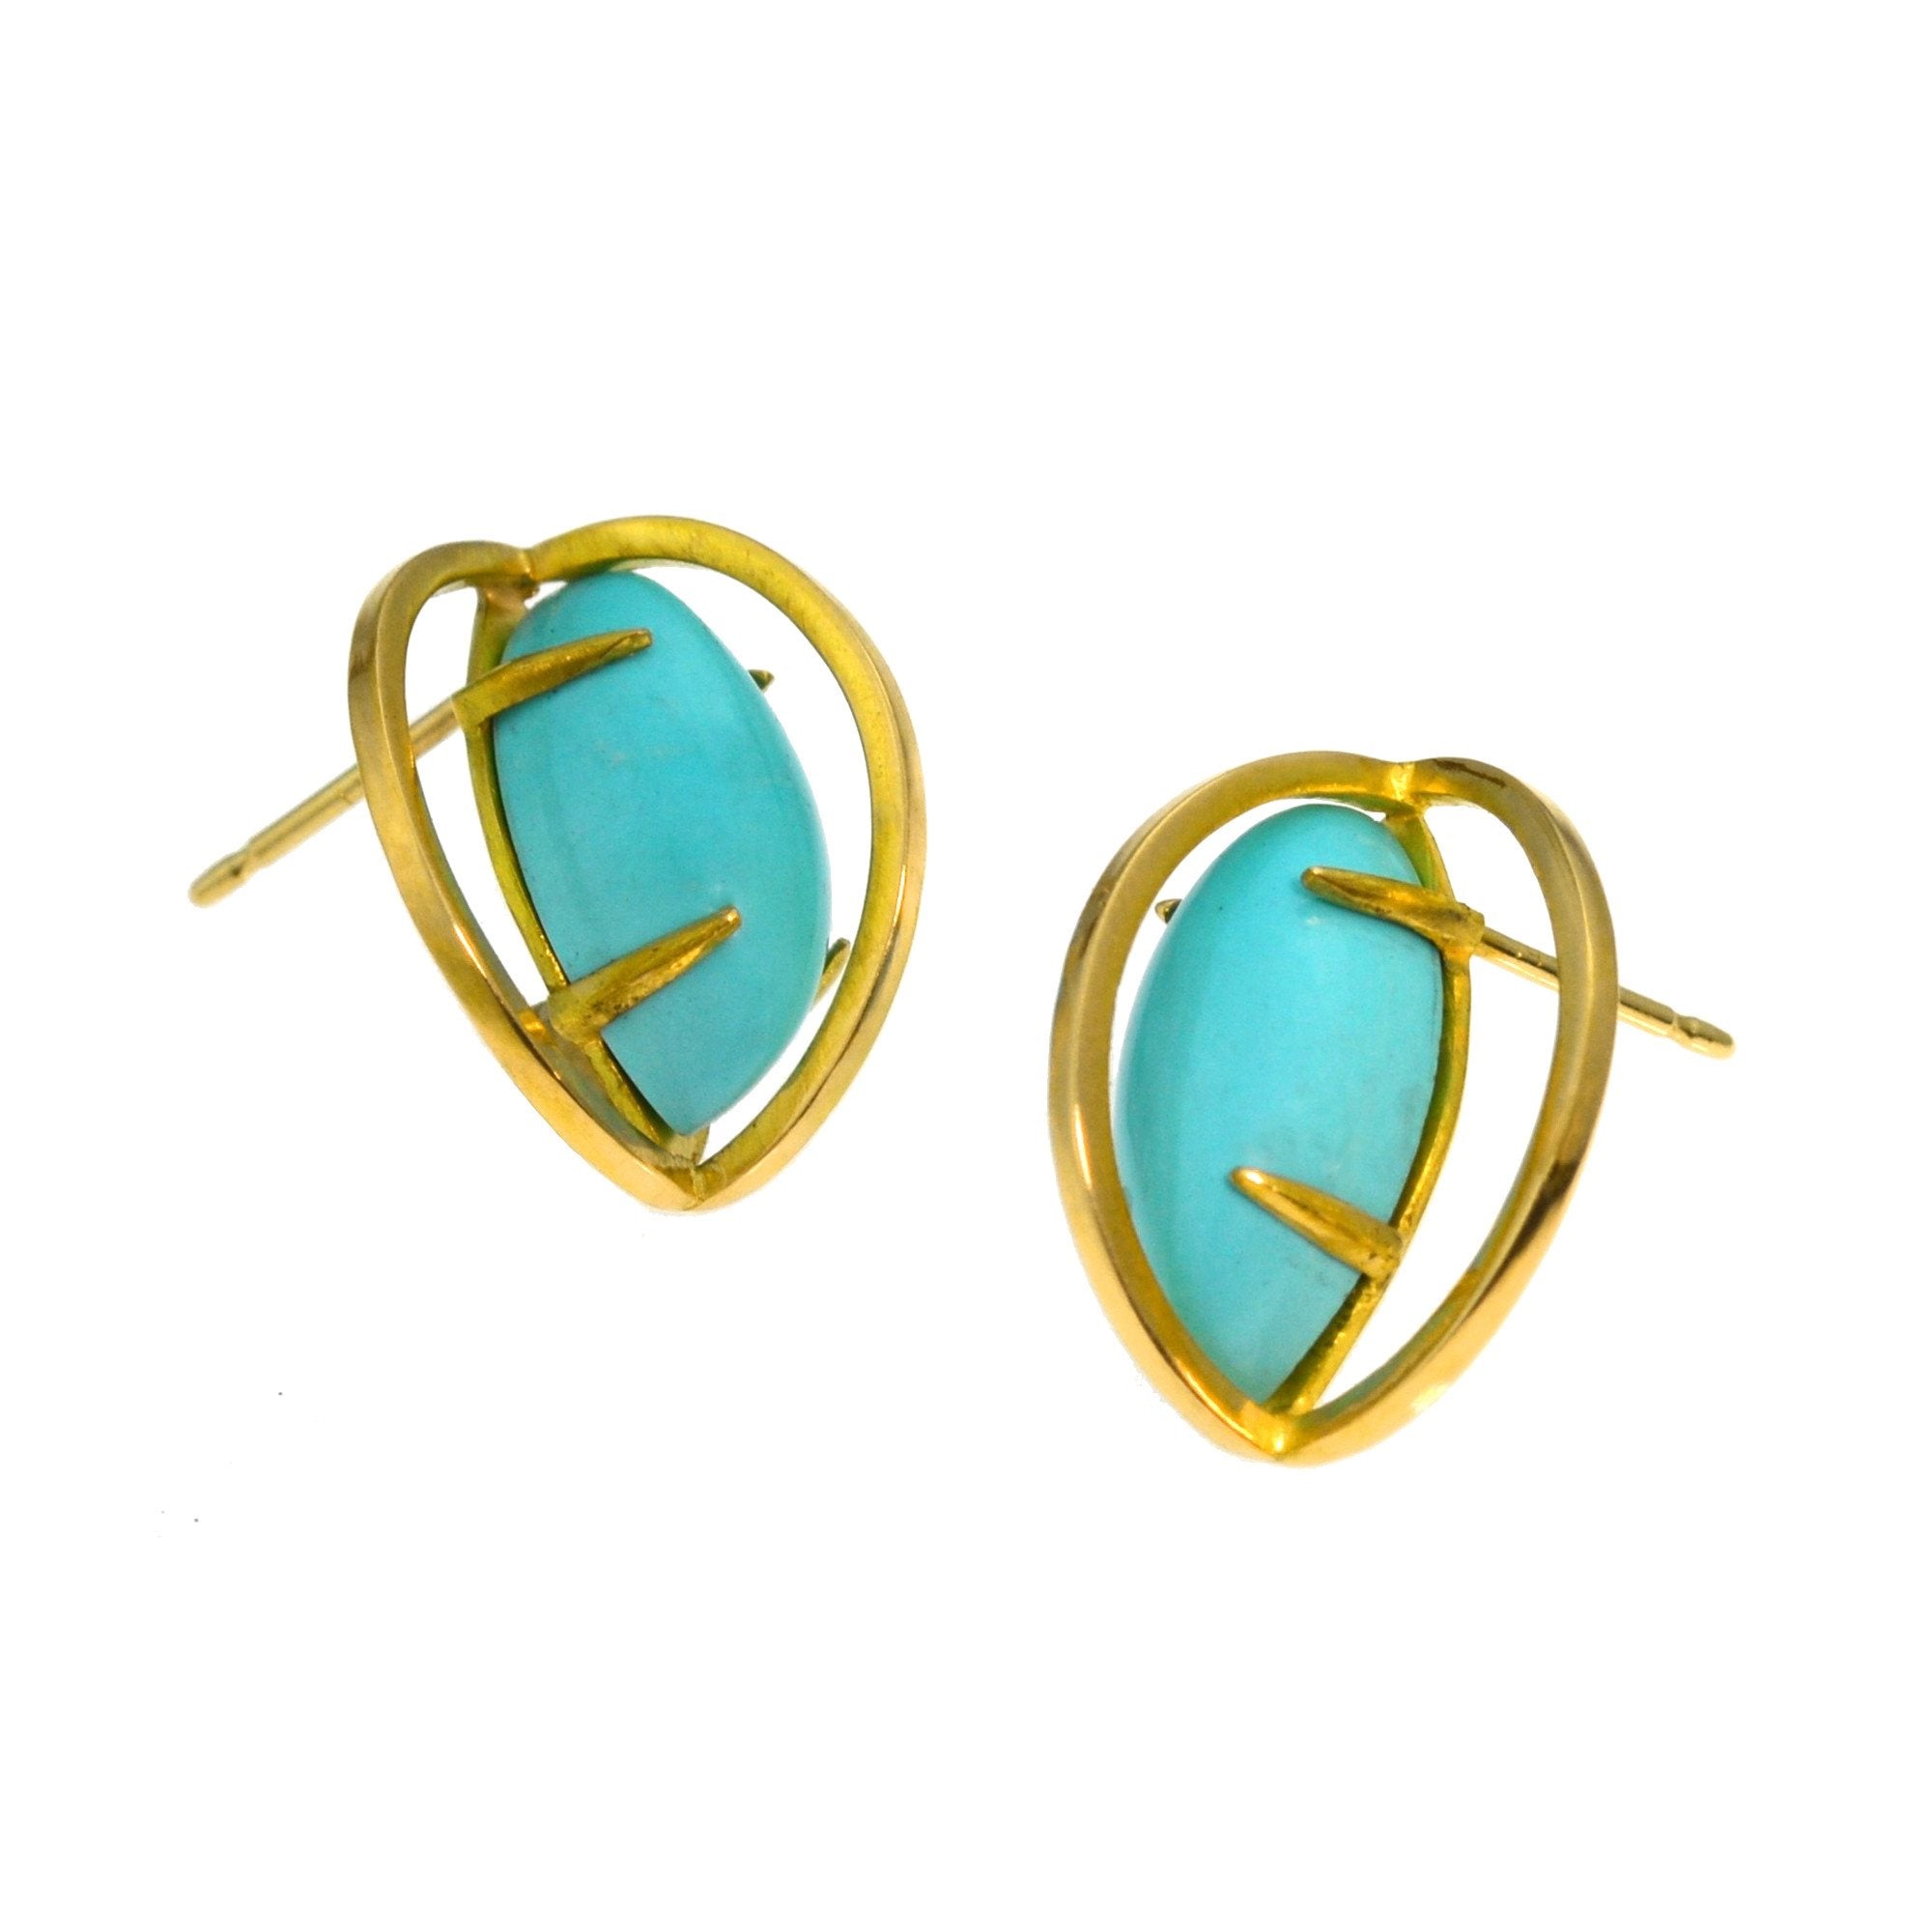 Slip Stream Earring Stud in 18k gold with natural Persian Turquoise